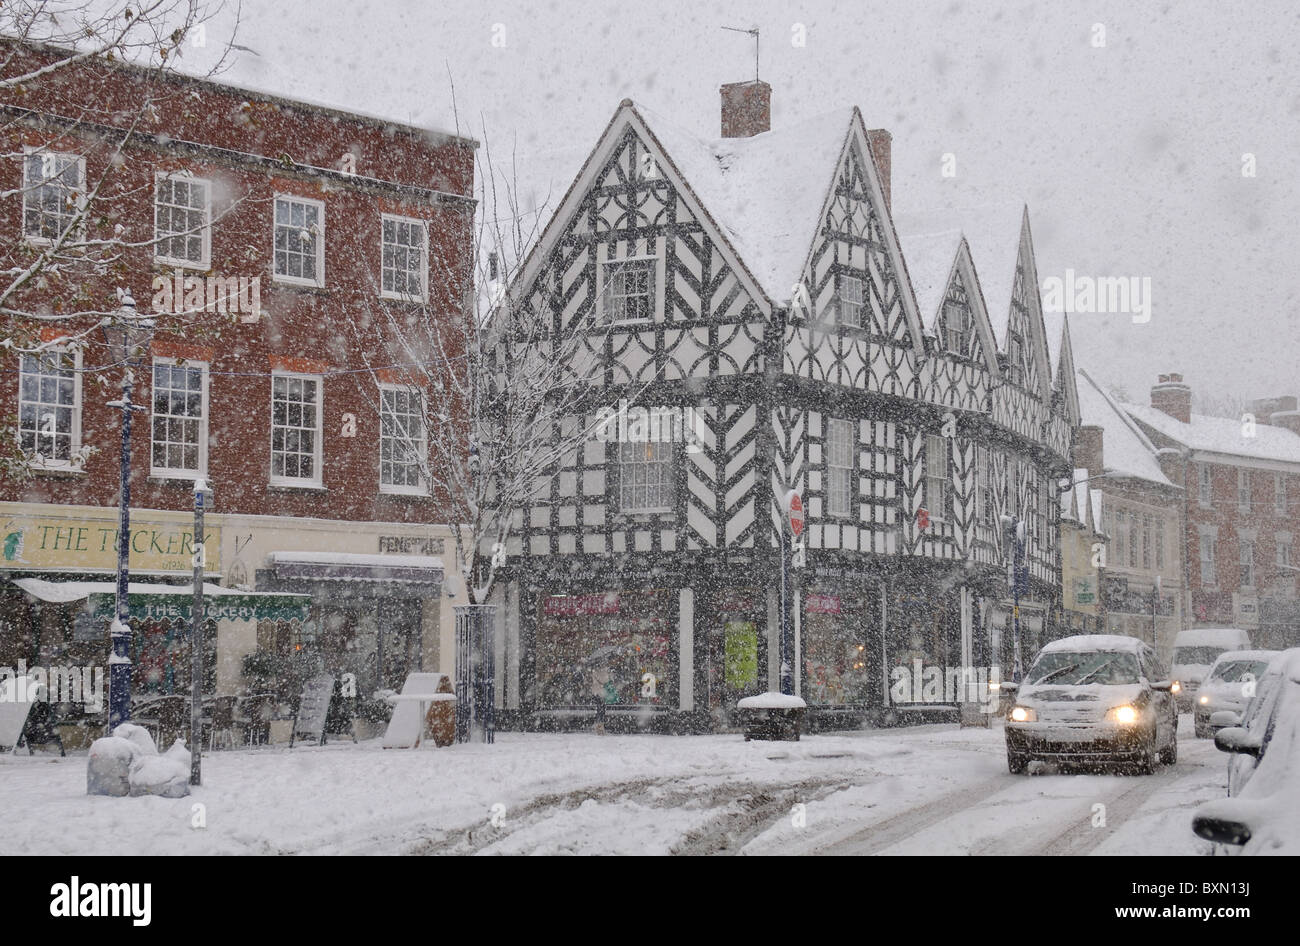 Warwick town centre during heavy snowfall Stock Photo